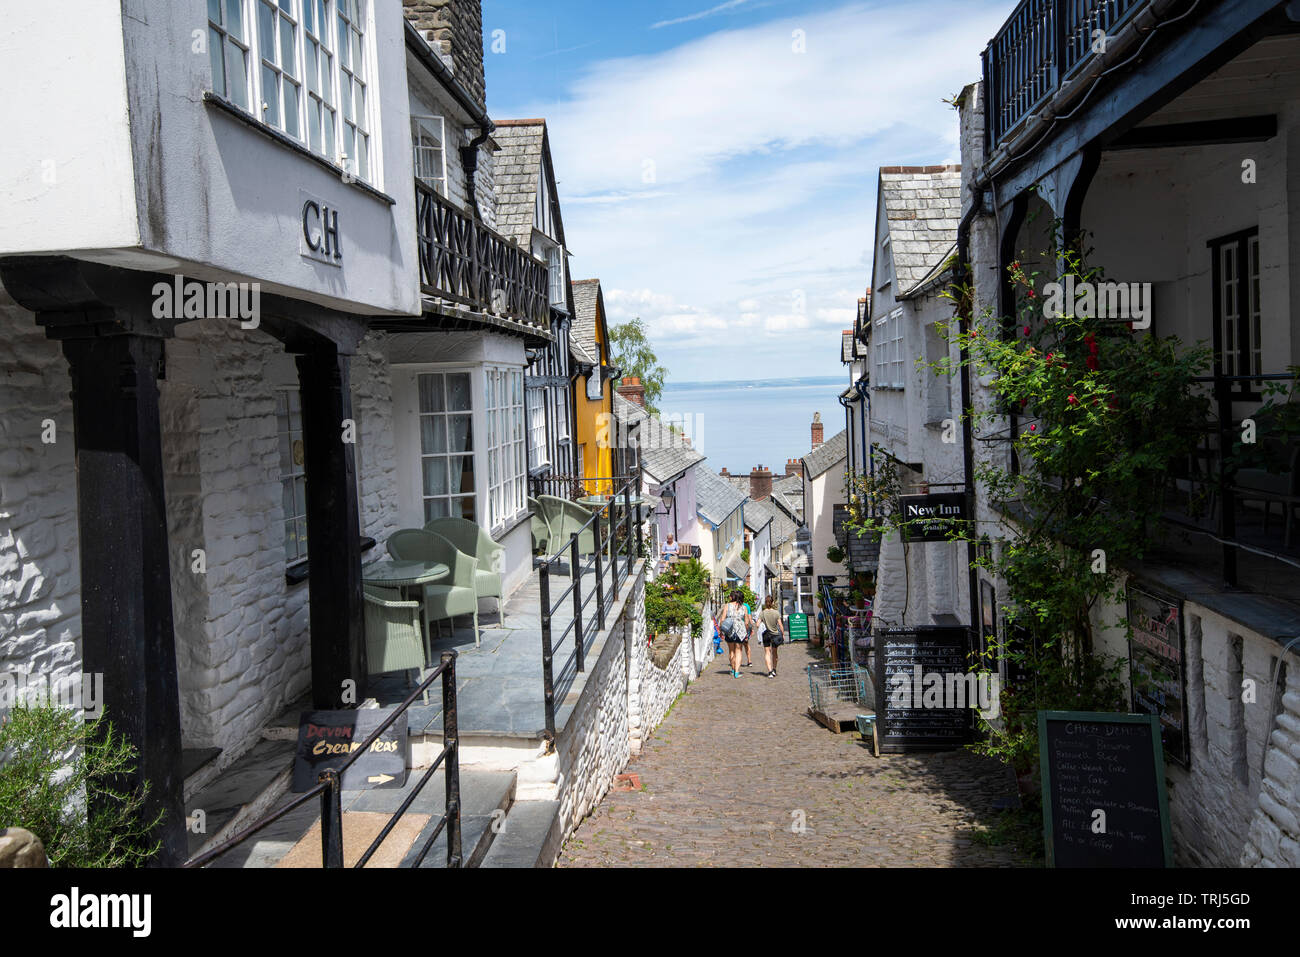 A sunny day on the steep cobbled streets of Clovelly, Devon England UK Stock Photo